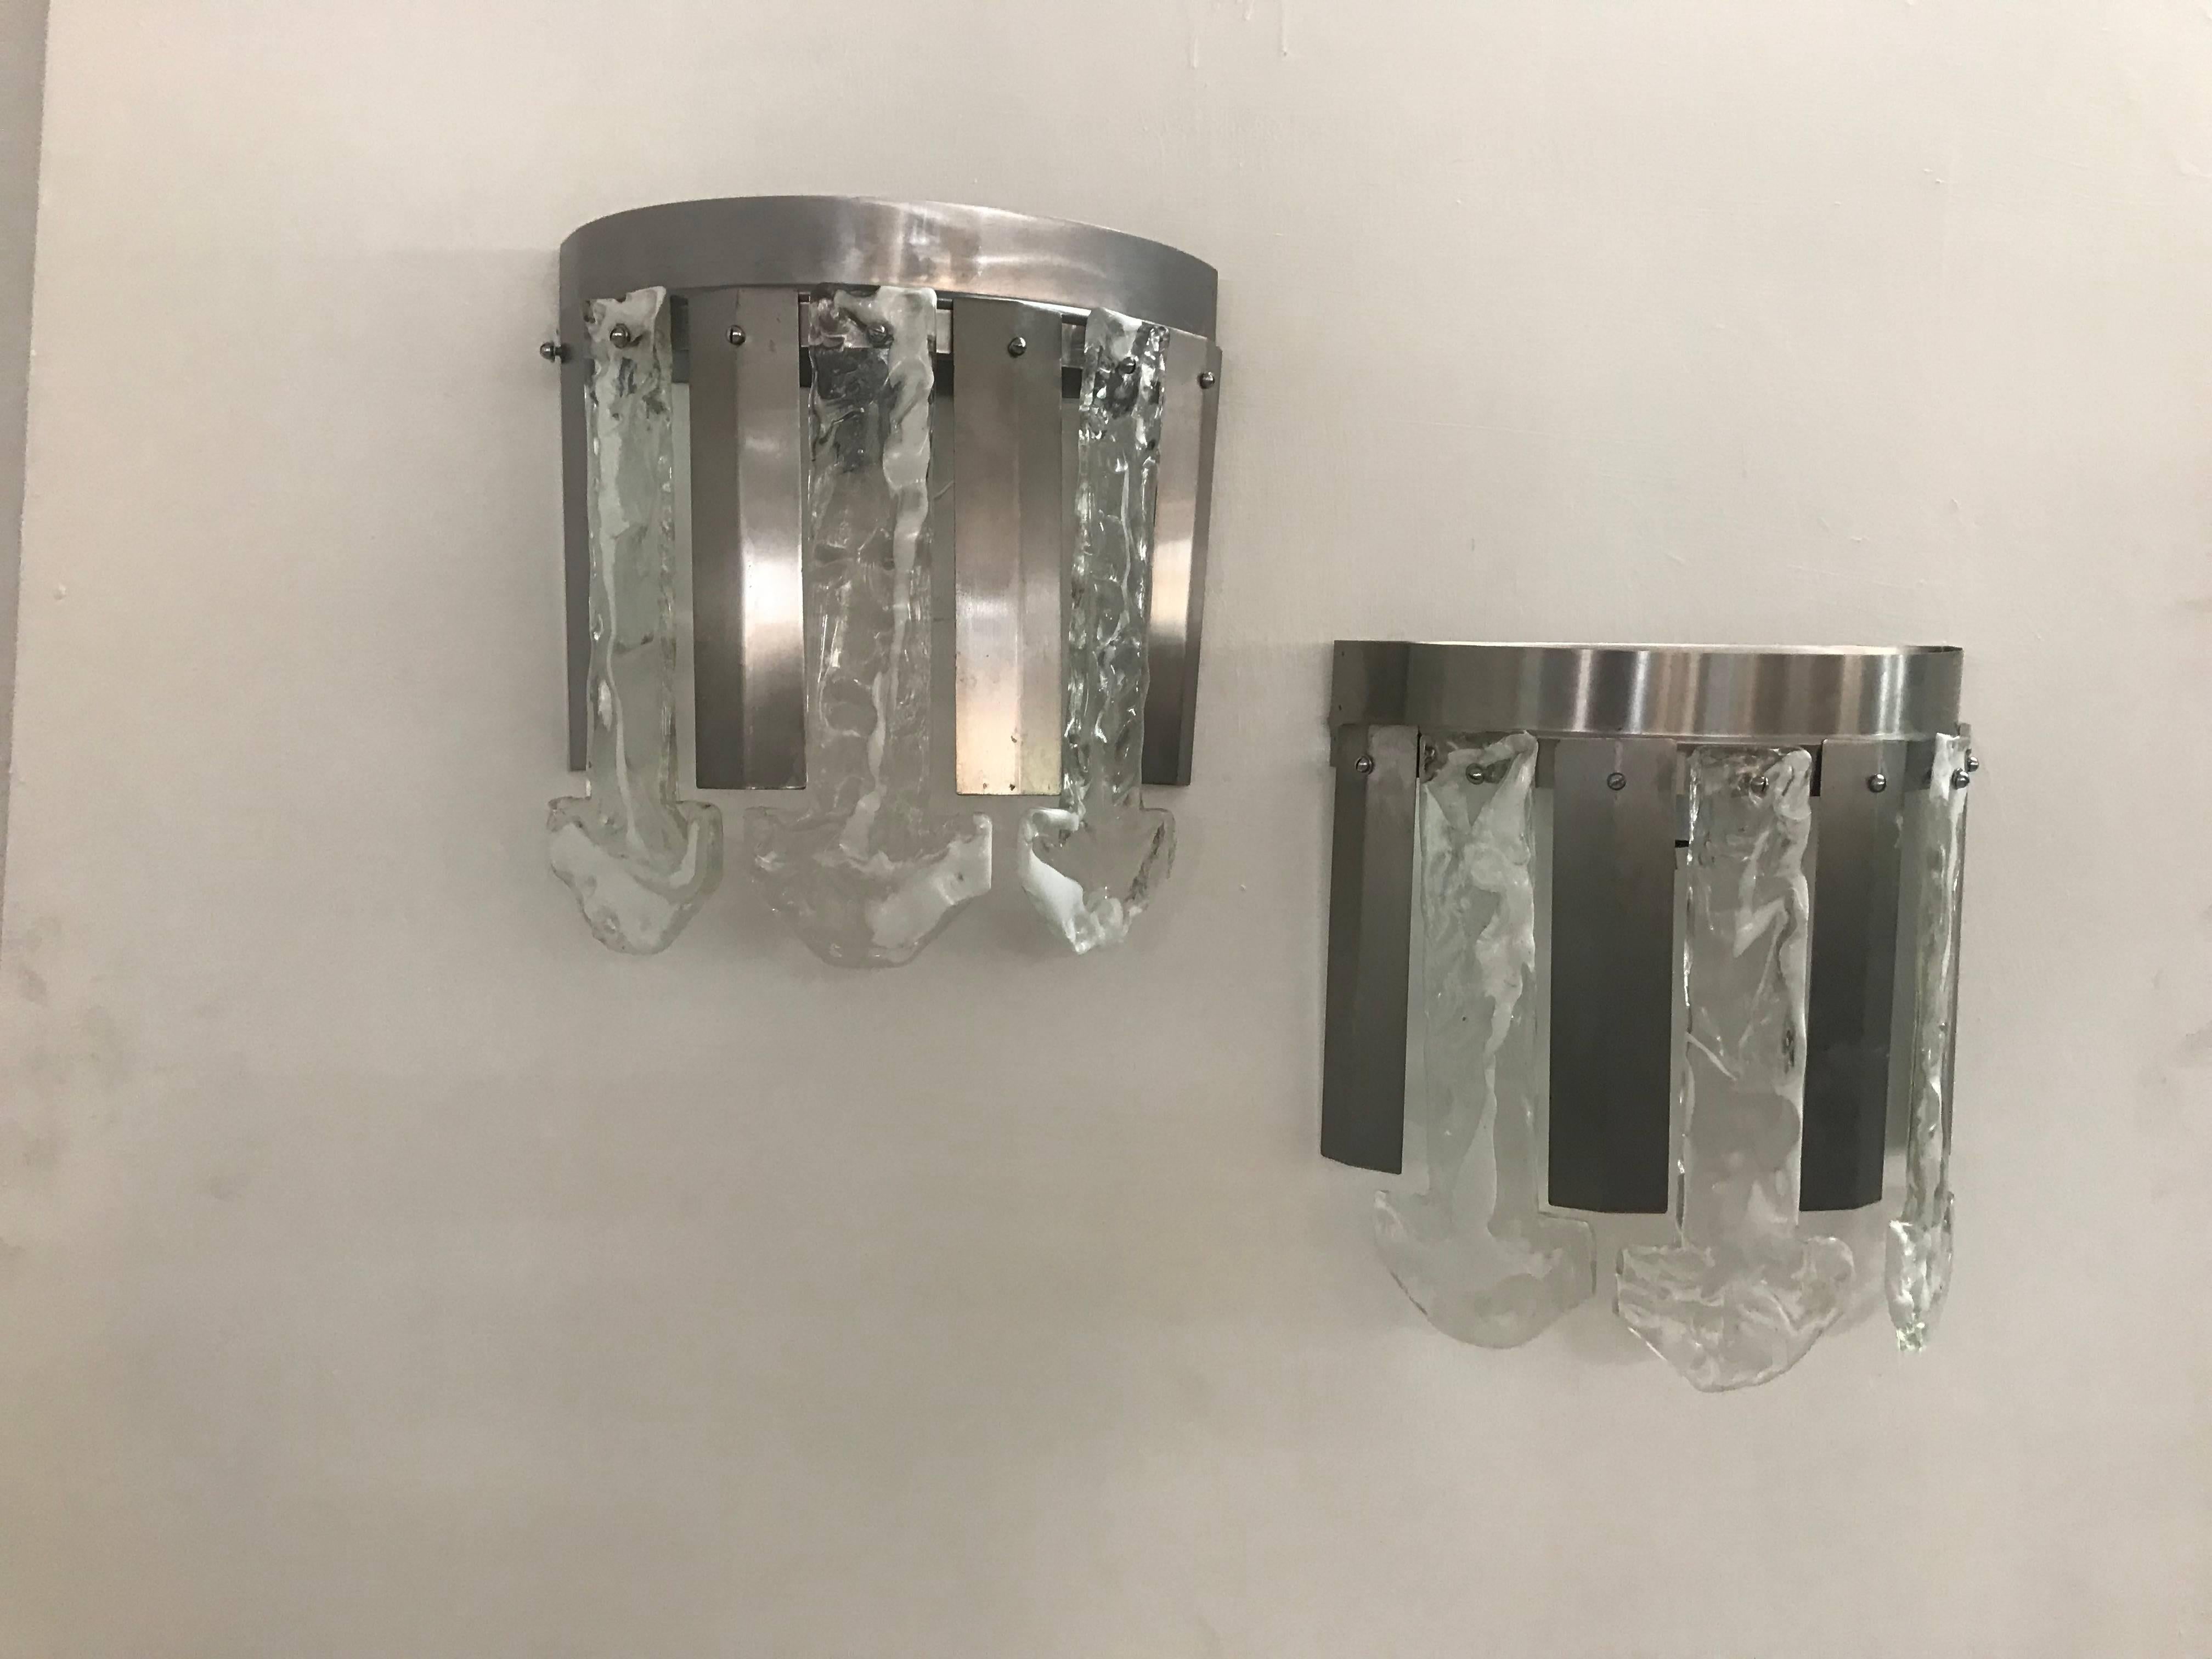 Mid-Century Modern Mazzega two-light sconce in brushed steel and clear and white Murano glass, circa 1970.